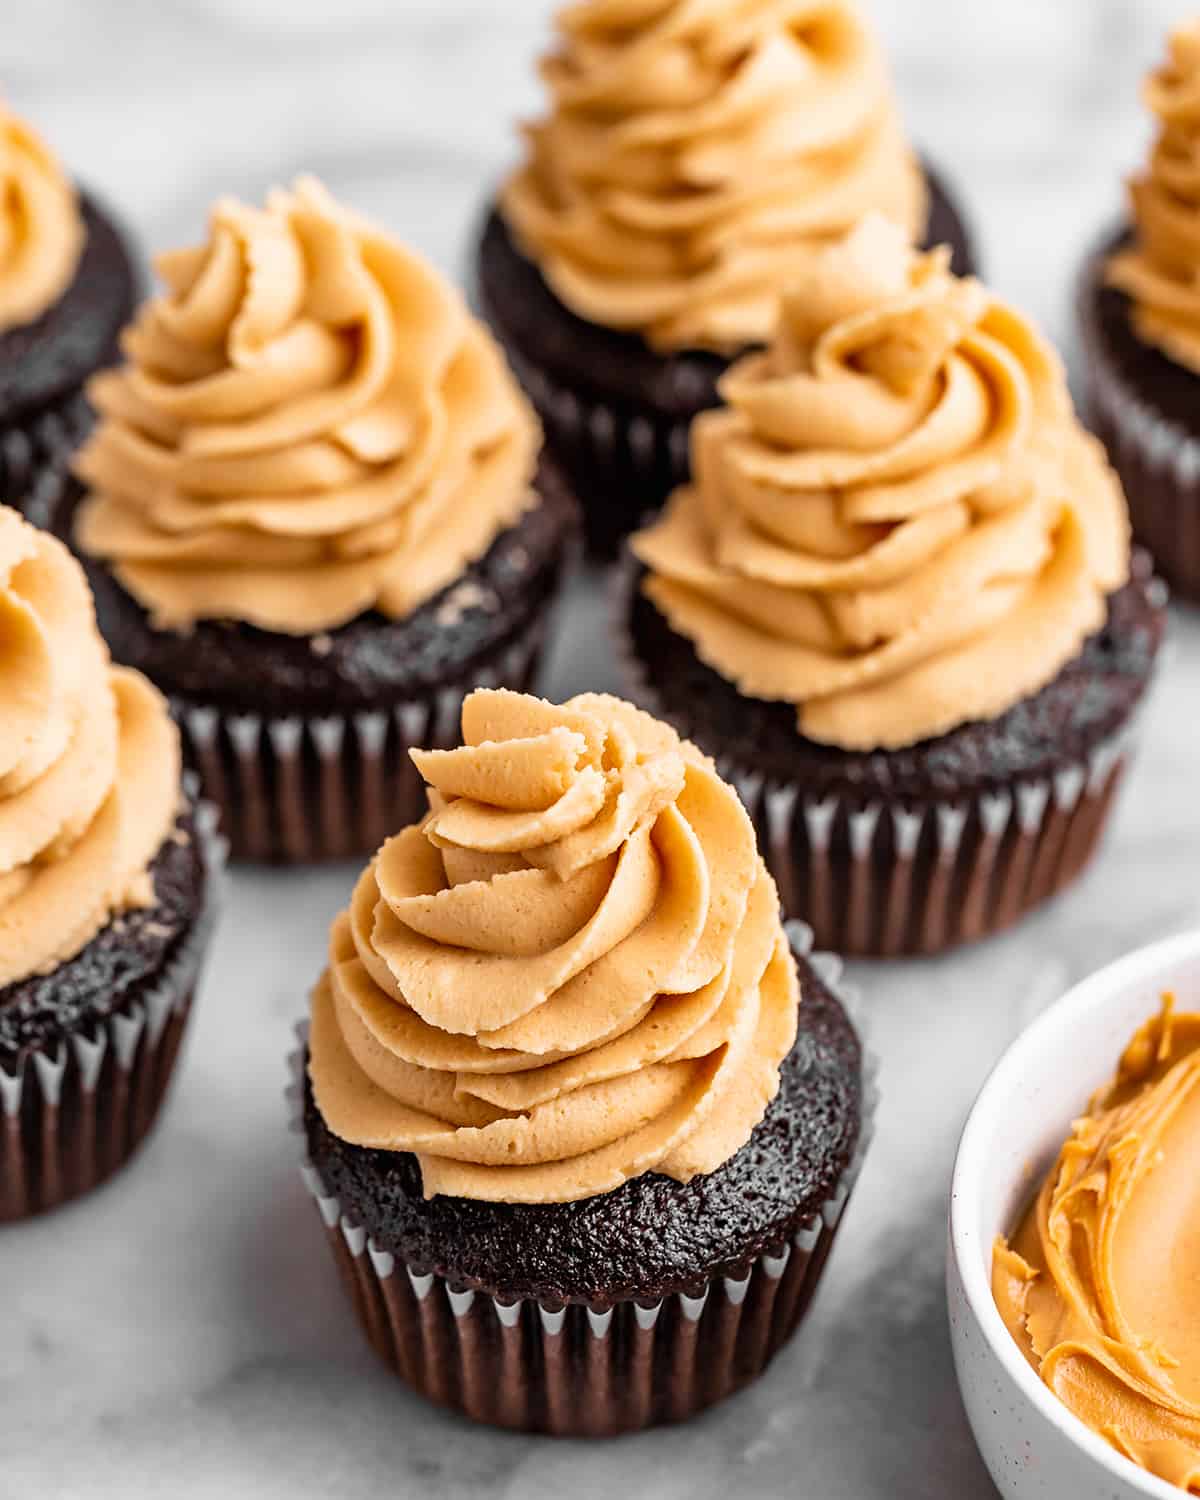 7 chocolate cupcakes with Peanut Butter Frosting on top 